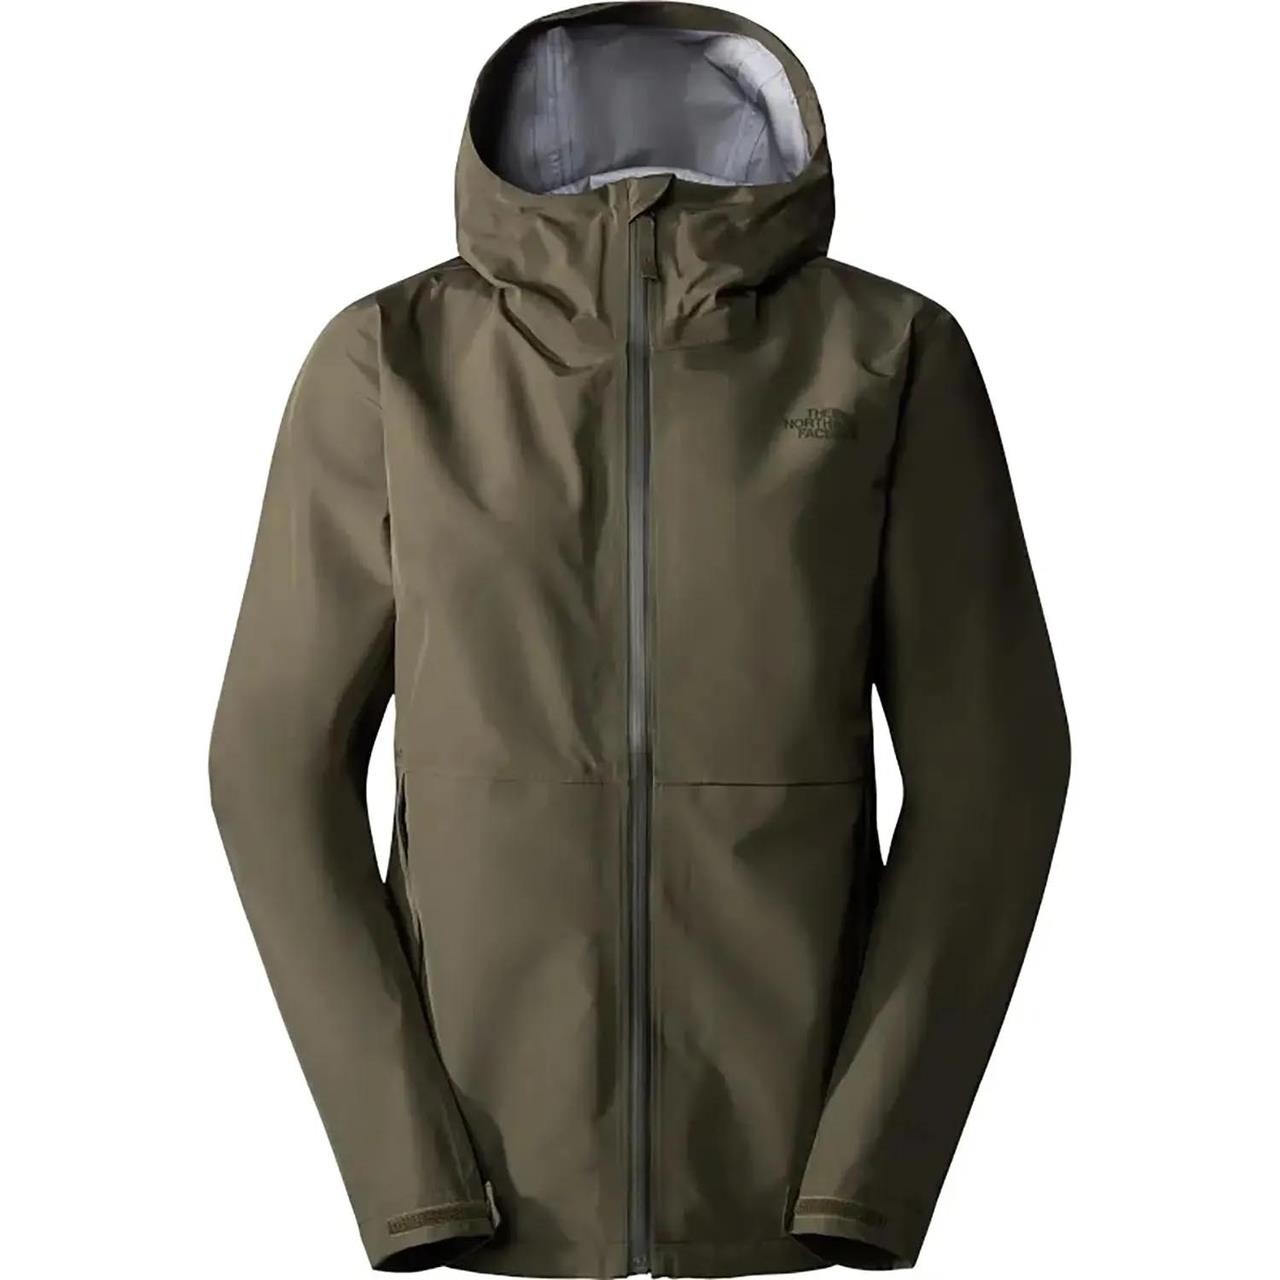 Se The North Face Womens Dryzzle Futurelight Jacket (Grøn (NEW TAUPE GREEN) X-large) hos Friluftsland.dk